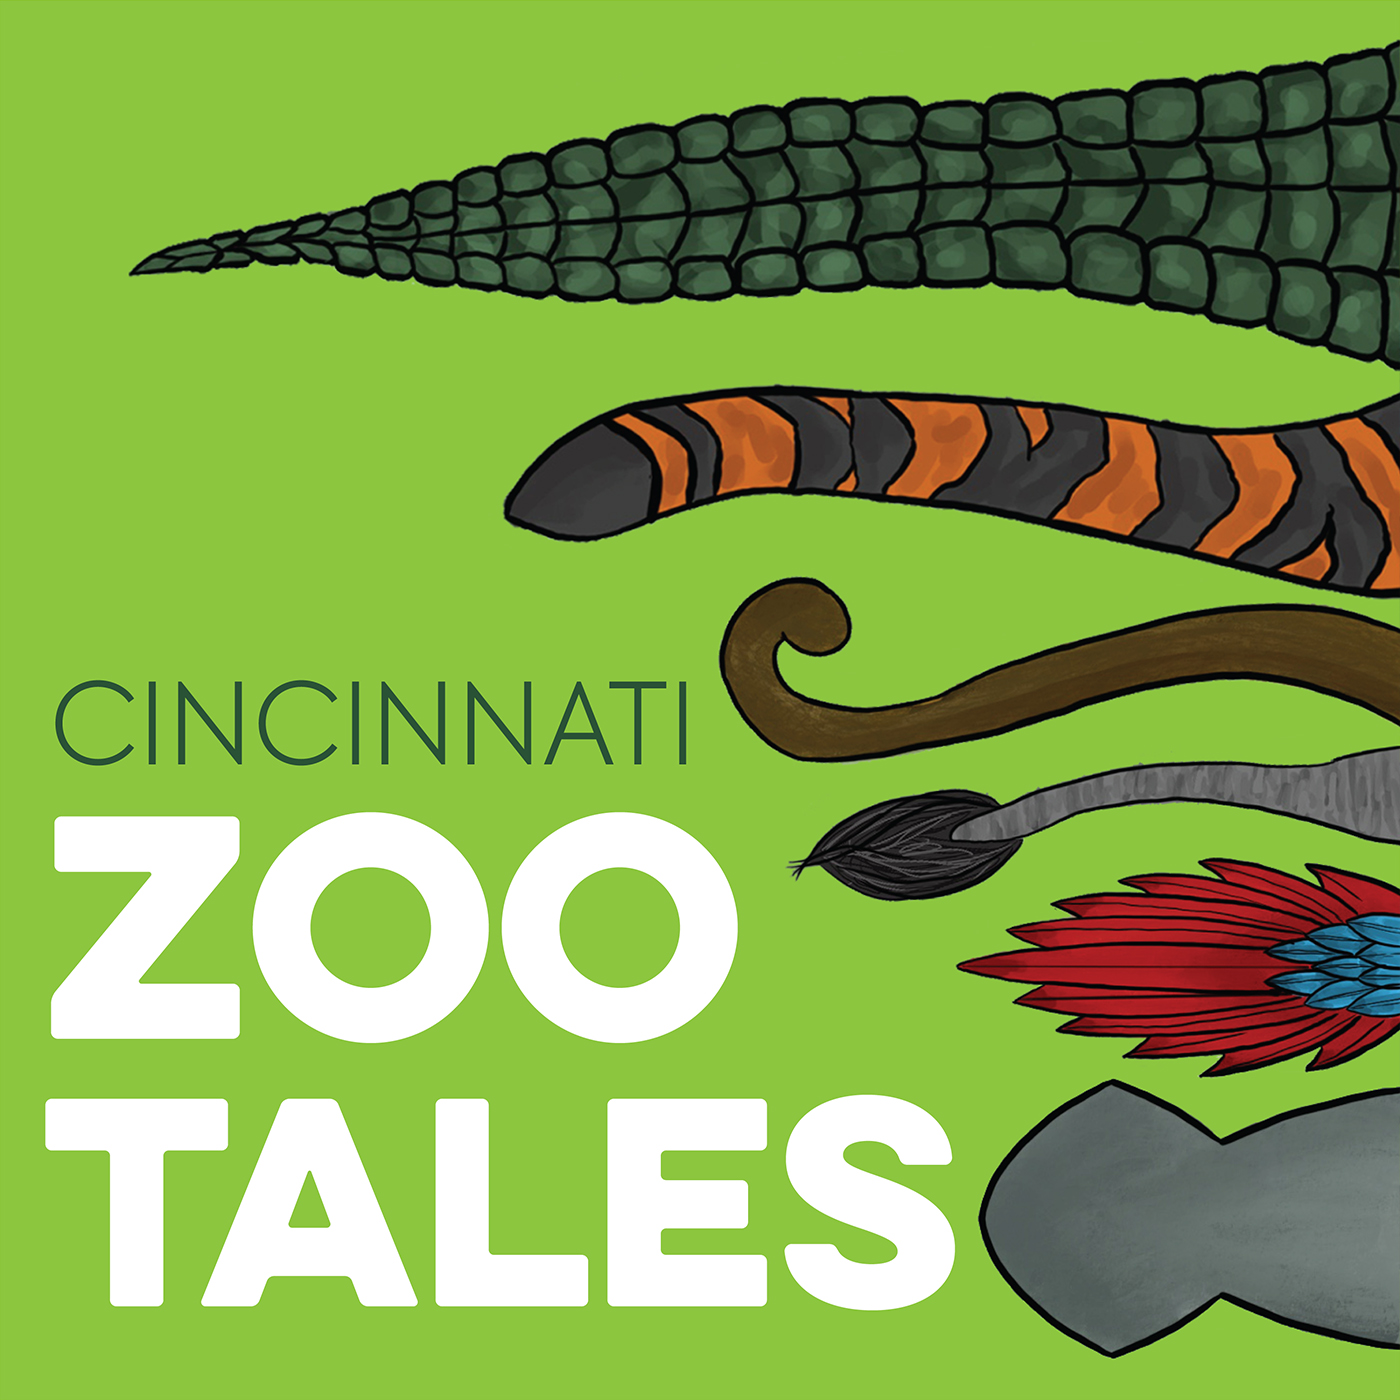 Zoo tales podcast logo showing different types of animal tails